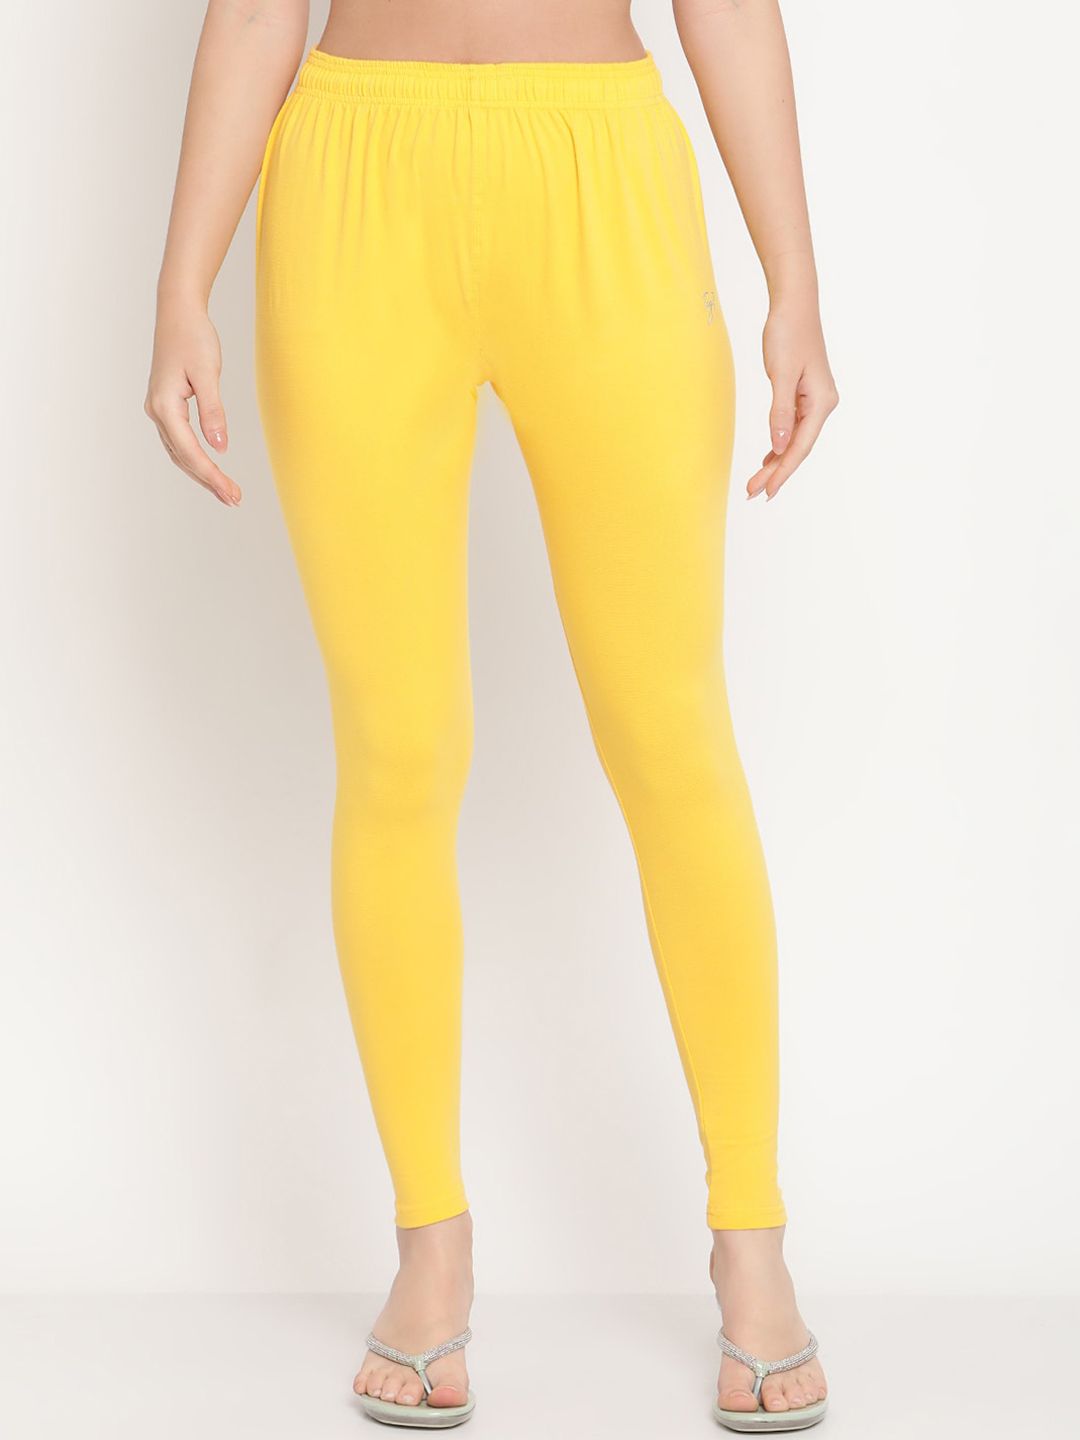 TAG 7 Women Yellow Solid Cotton Ankle-Length Leggings Price in India